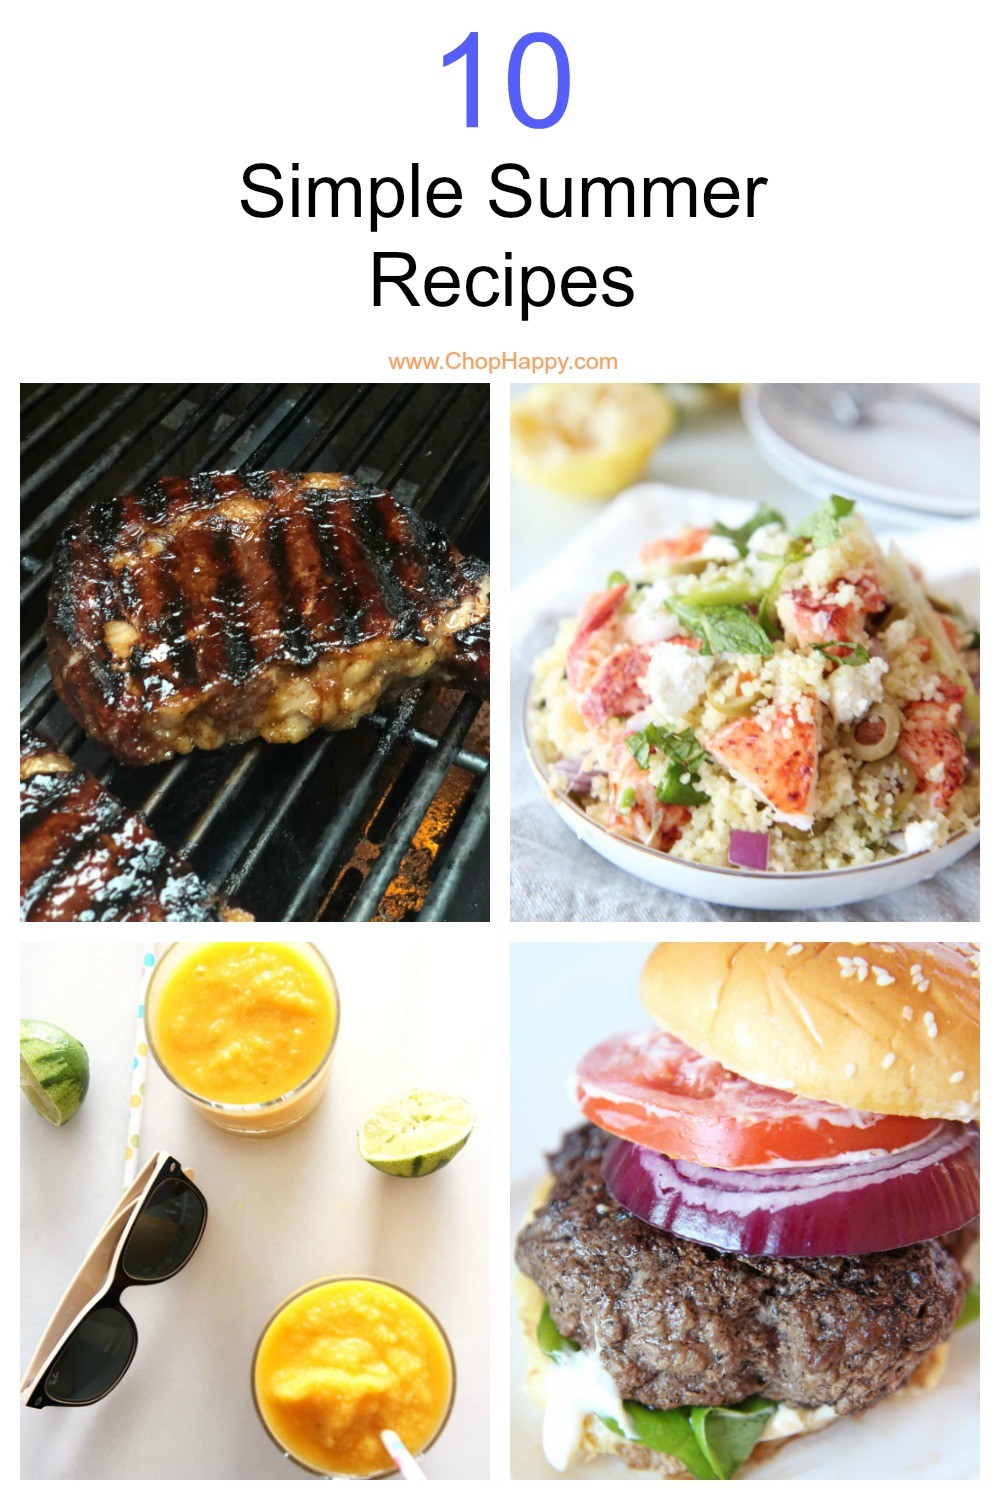 10 Simple Summer Recipes. Summer is a time to relax at the beach, drink a frozen cocktail, and eat burgers. This list includes Mango cocktail, brown butter burger, lobster salad, easy steak recipe and more. Happy Cooking. #smmerrecipes #grillingrecipes